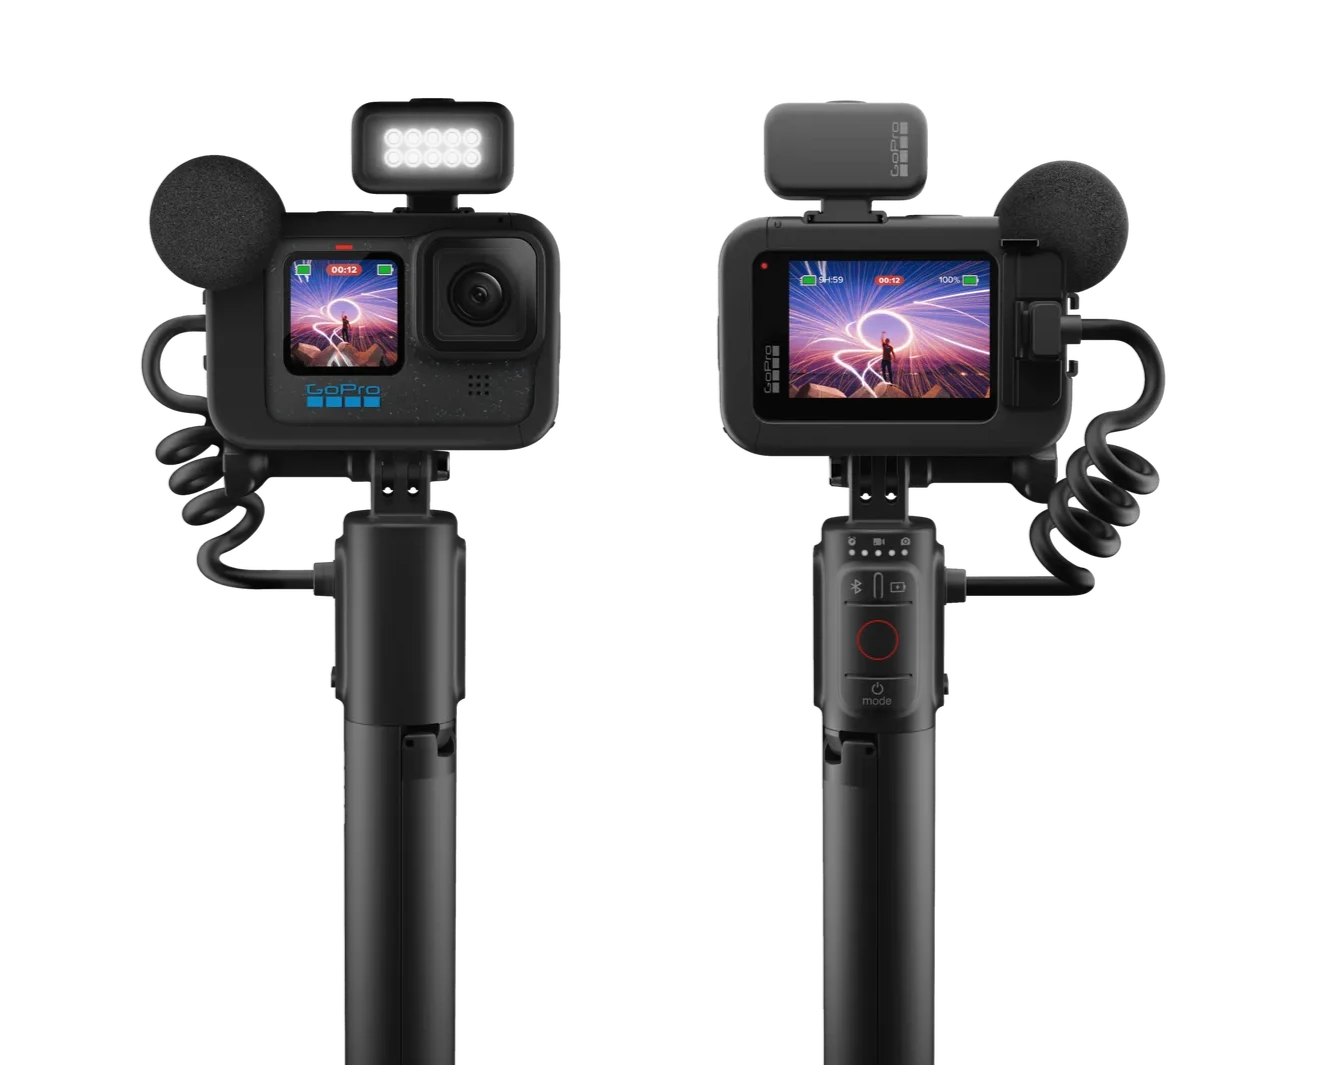 Front and back view of the GoPro with all of the attachments